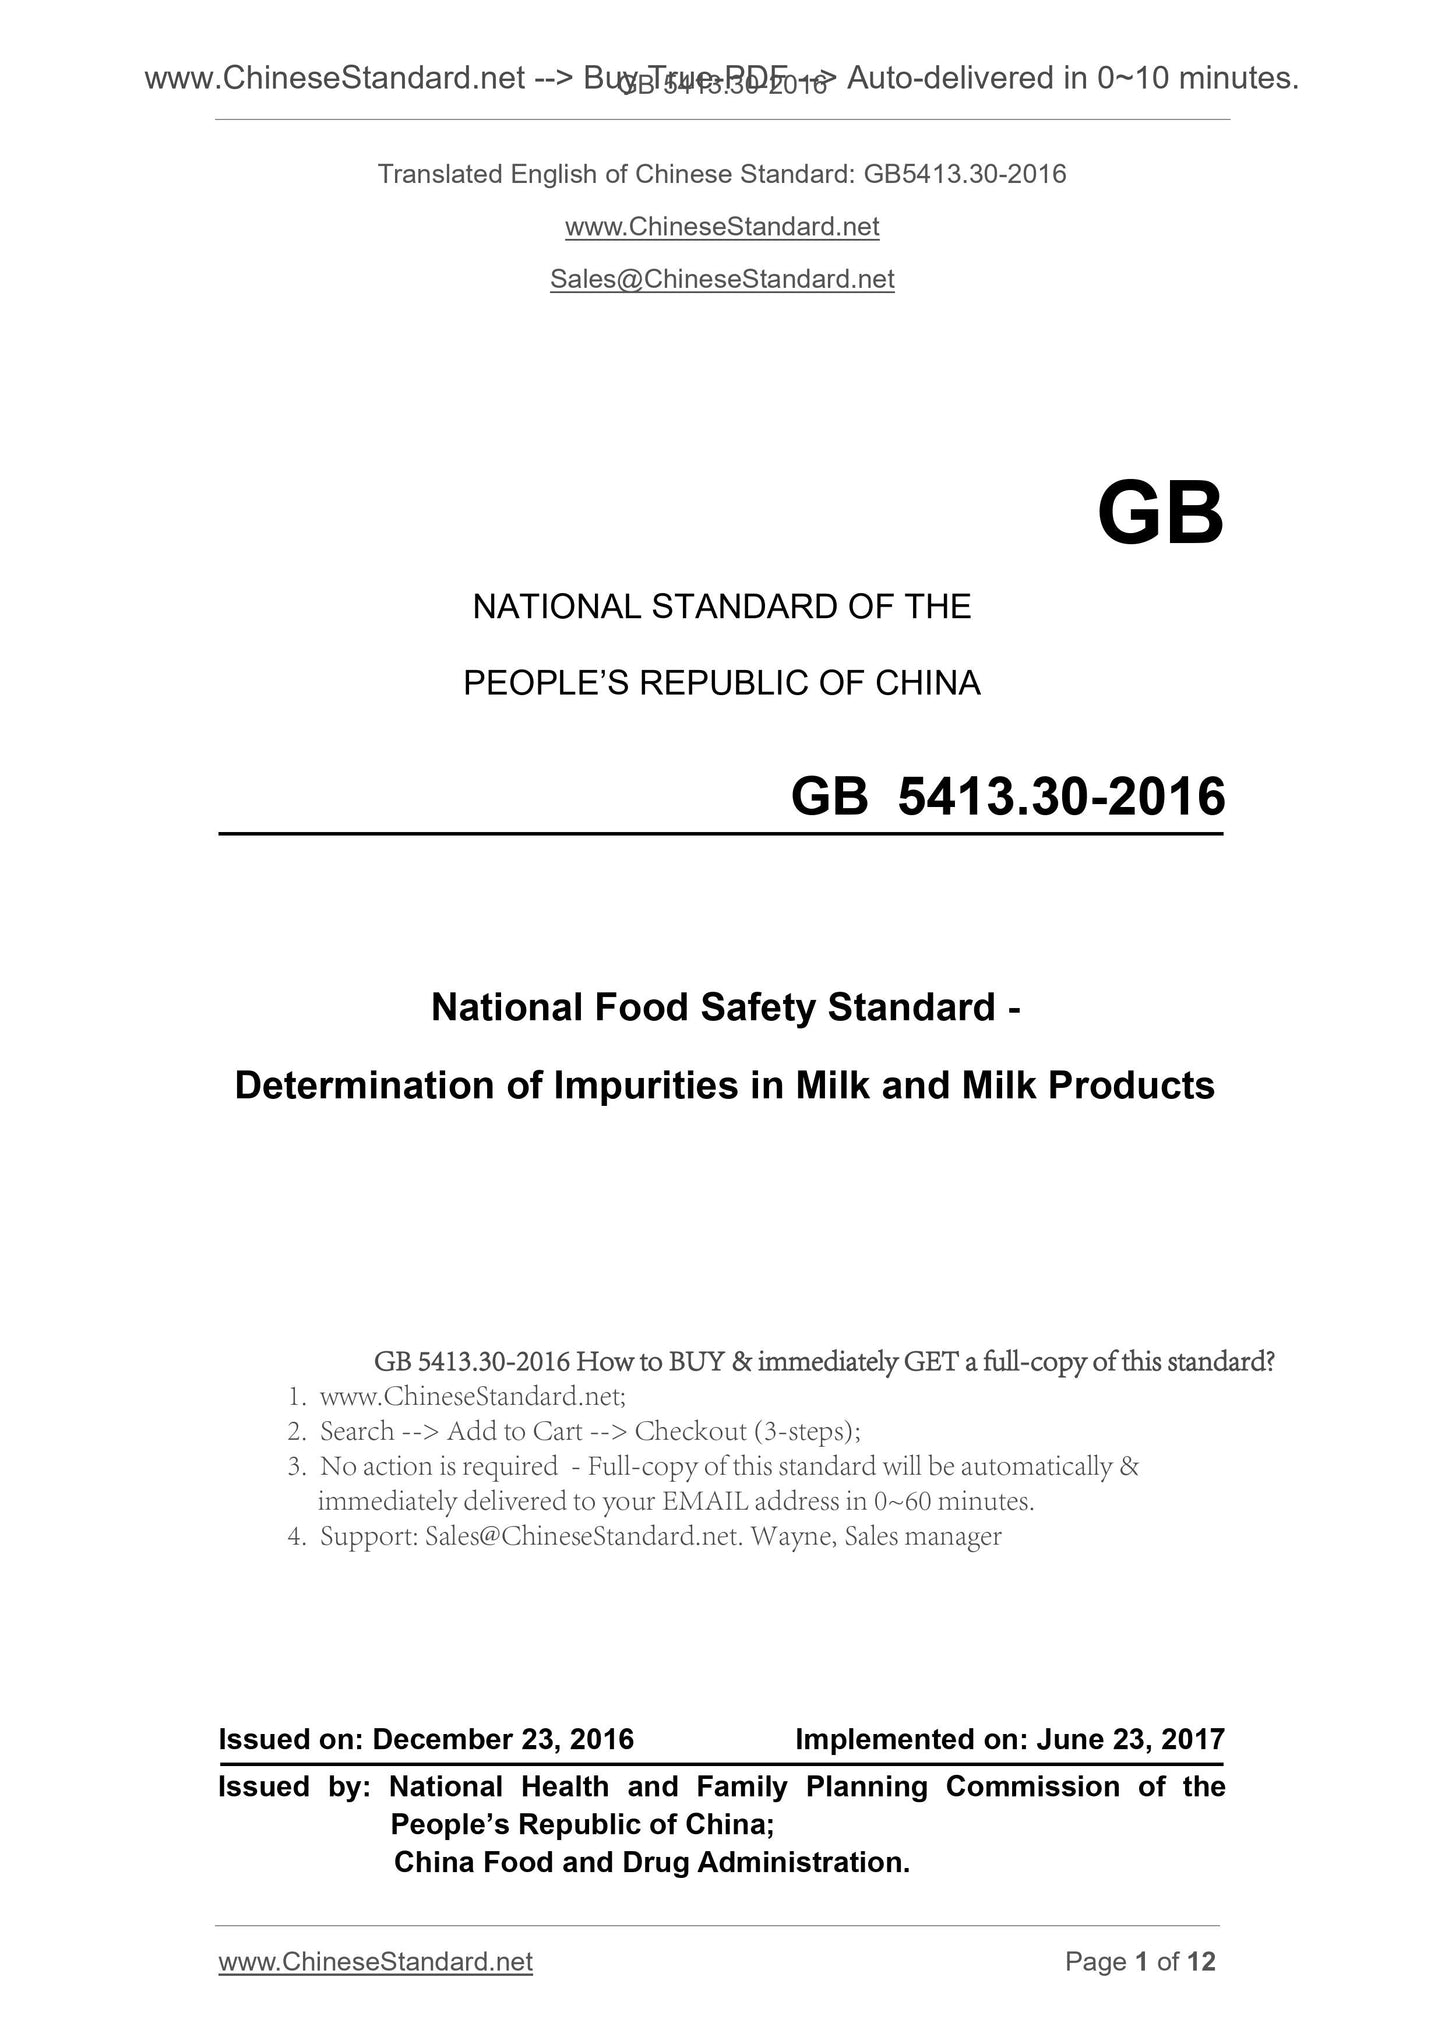 GB 5413.30-2016 Page 1